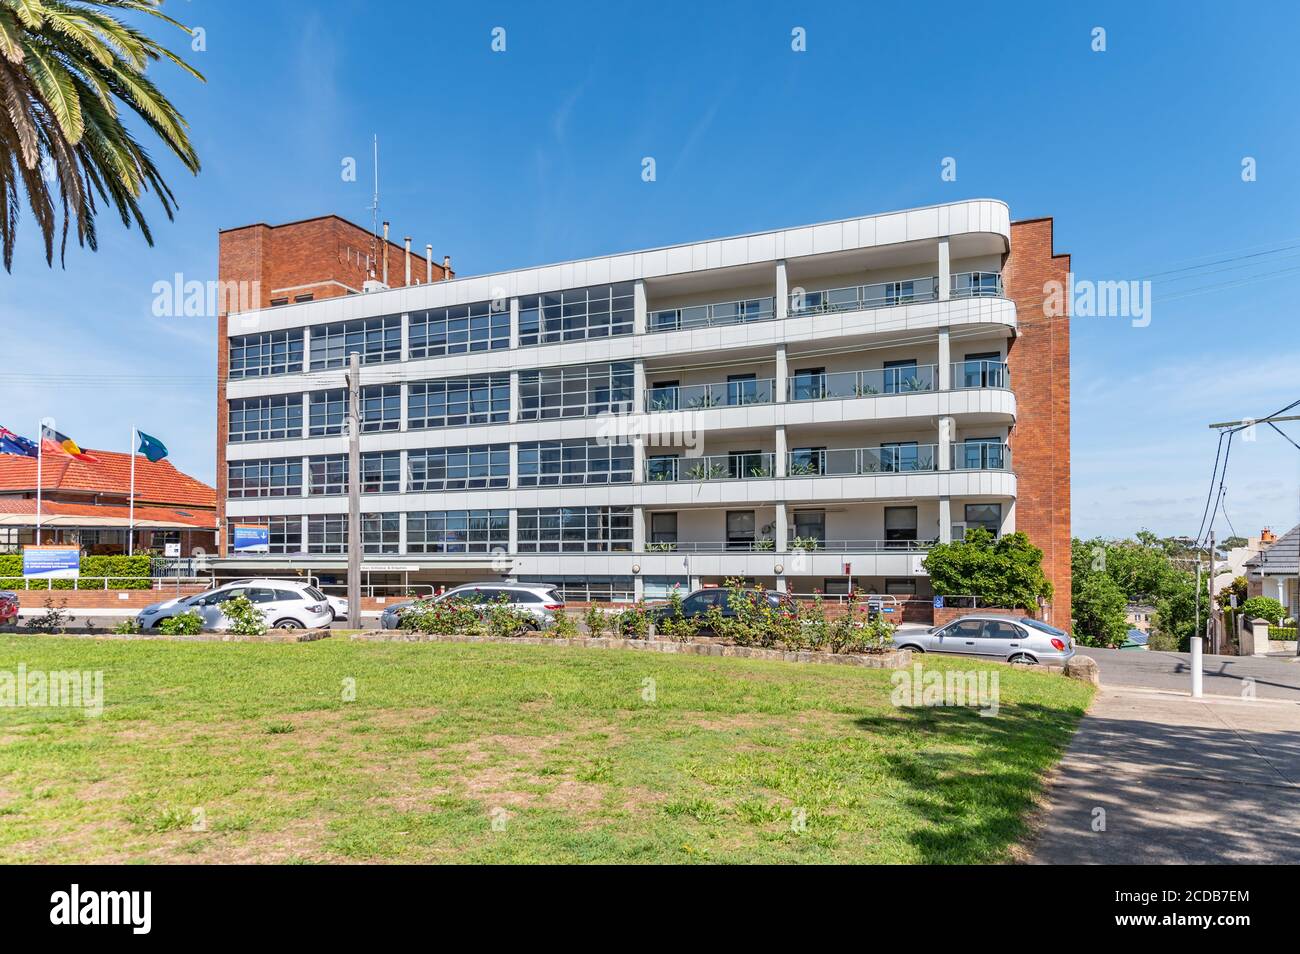 Page 3 - Balmain High Resolution Stock Photography and Images - Alamy